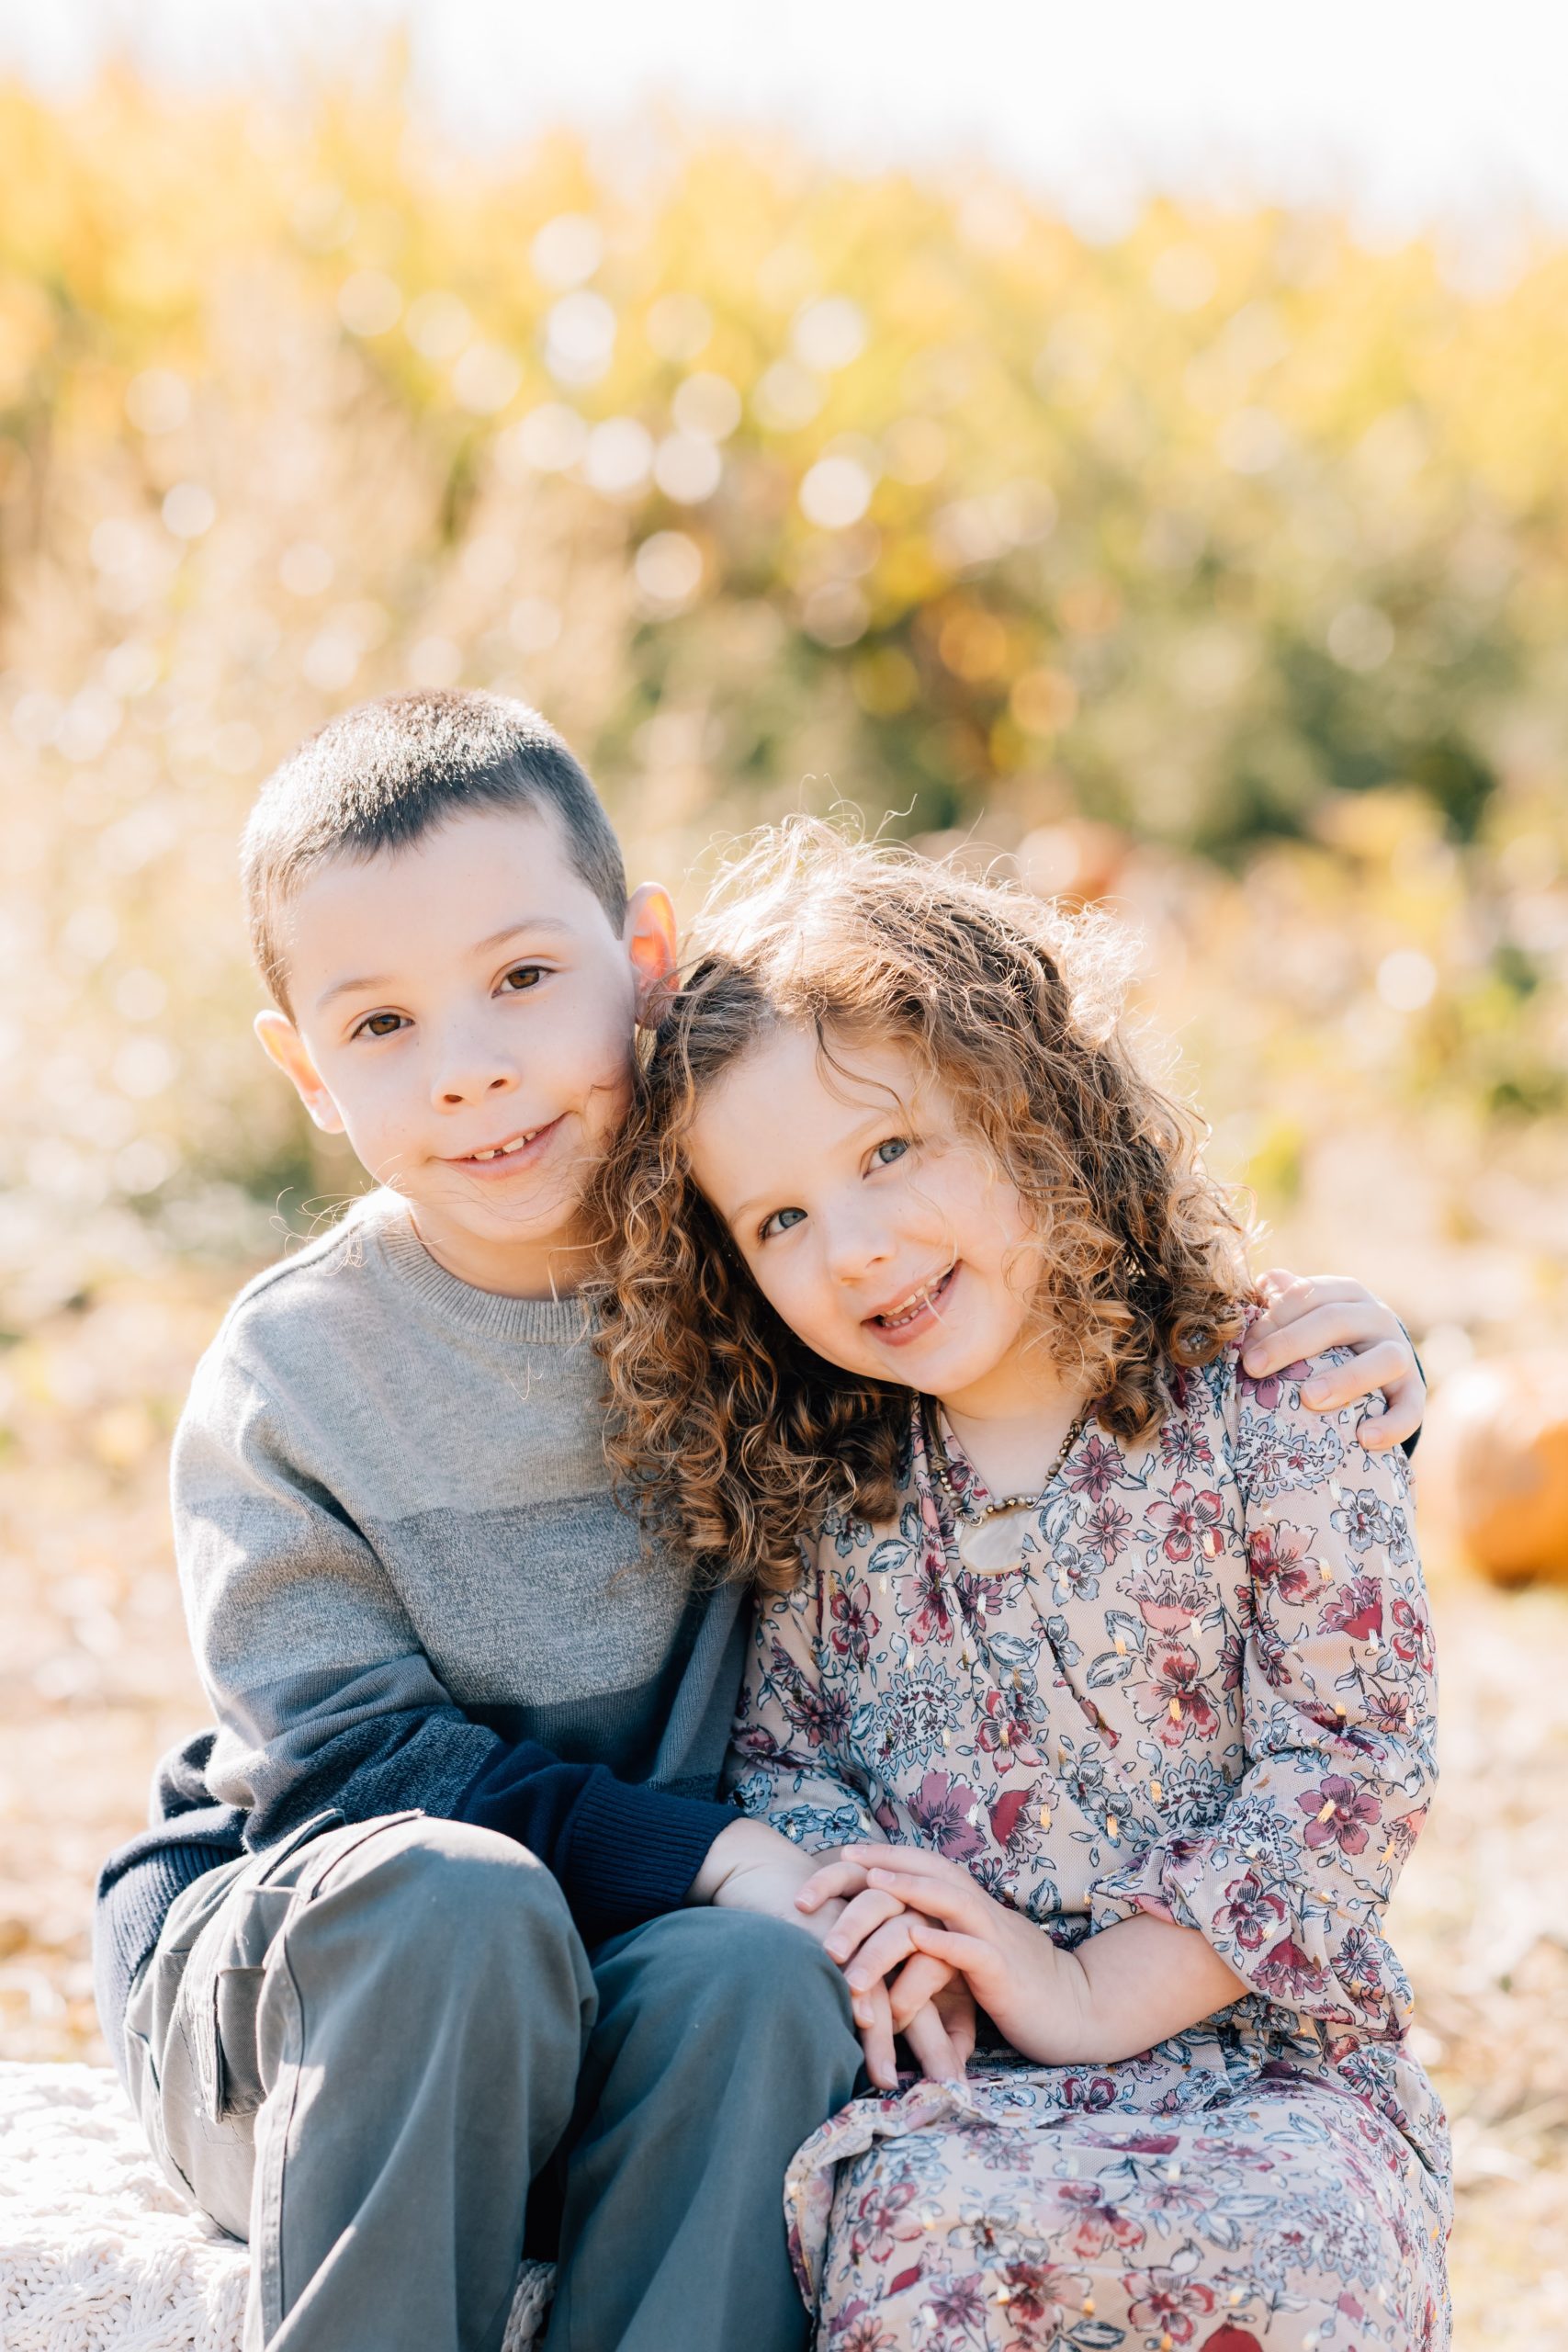 brother and sister pose in pumpkin patch on barrel during fall mini portrait session at Pumpkin Junction at Everitt Farms in Flemington, NJ Ringoes, NJ with Motherhood and Family Photographer Anne Haug of Golden Heart Photography.